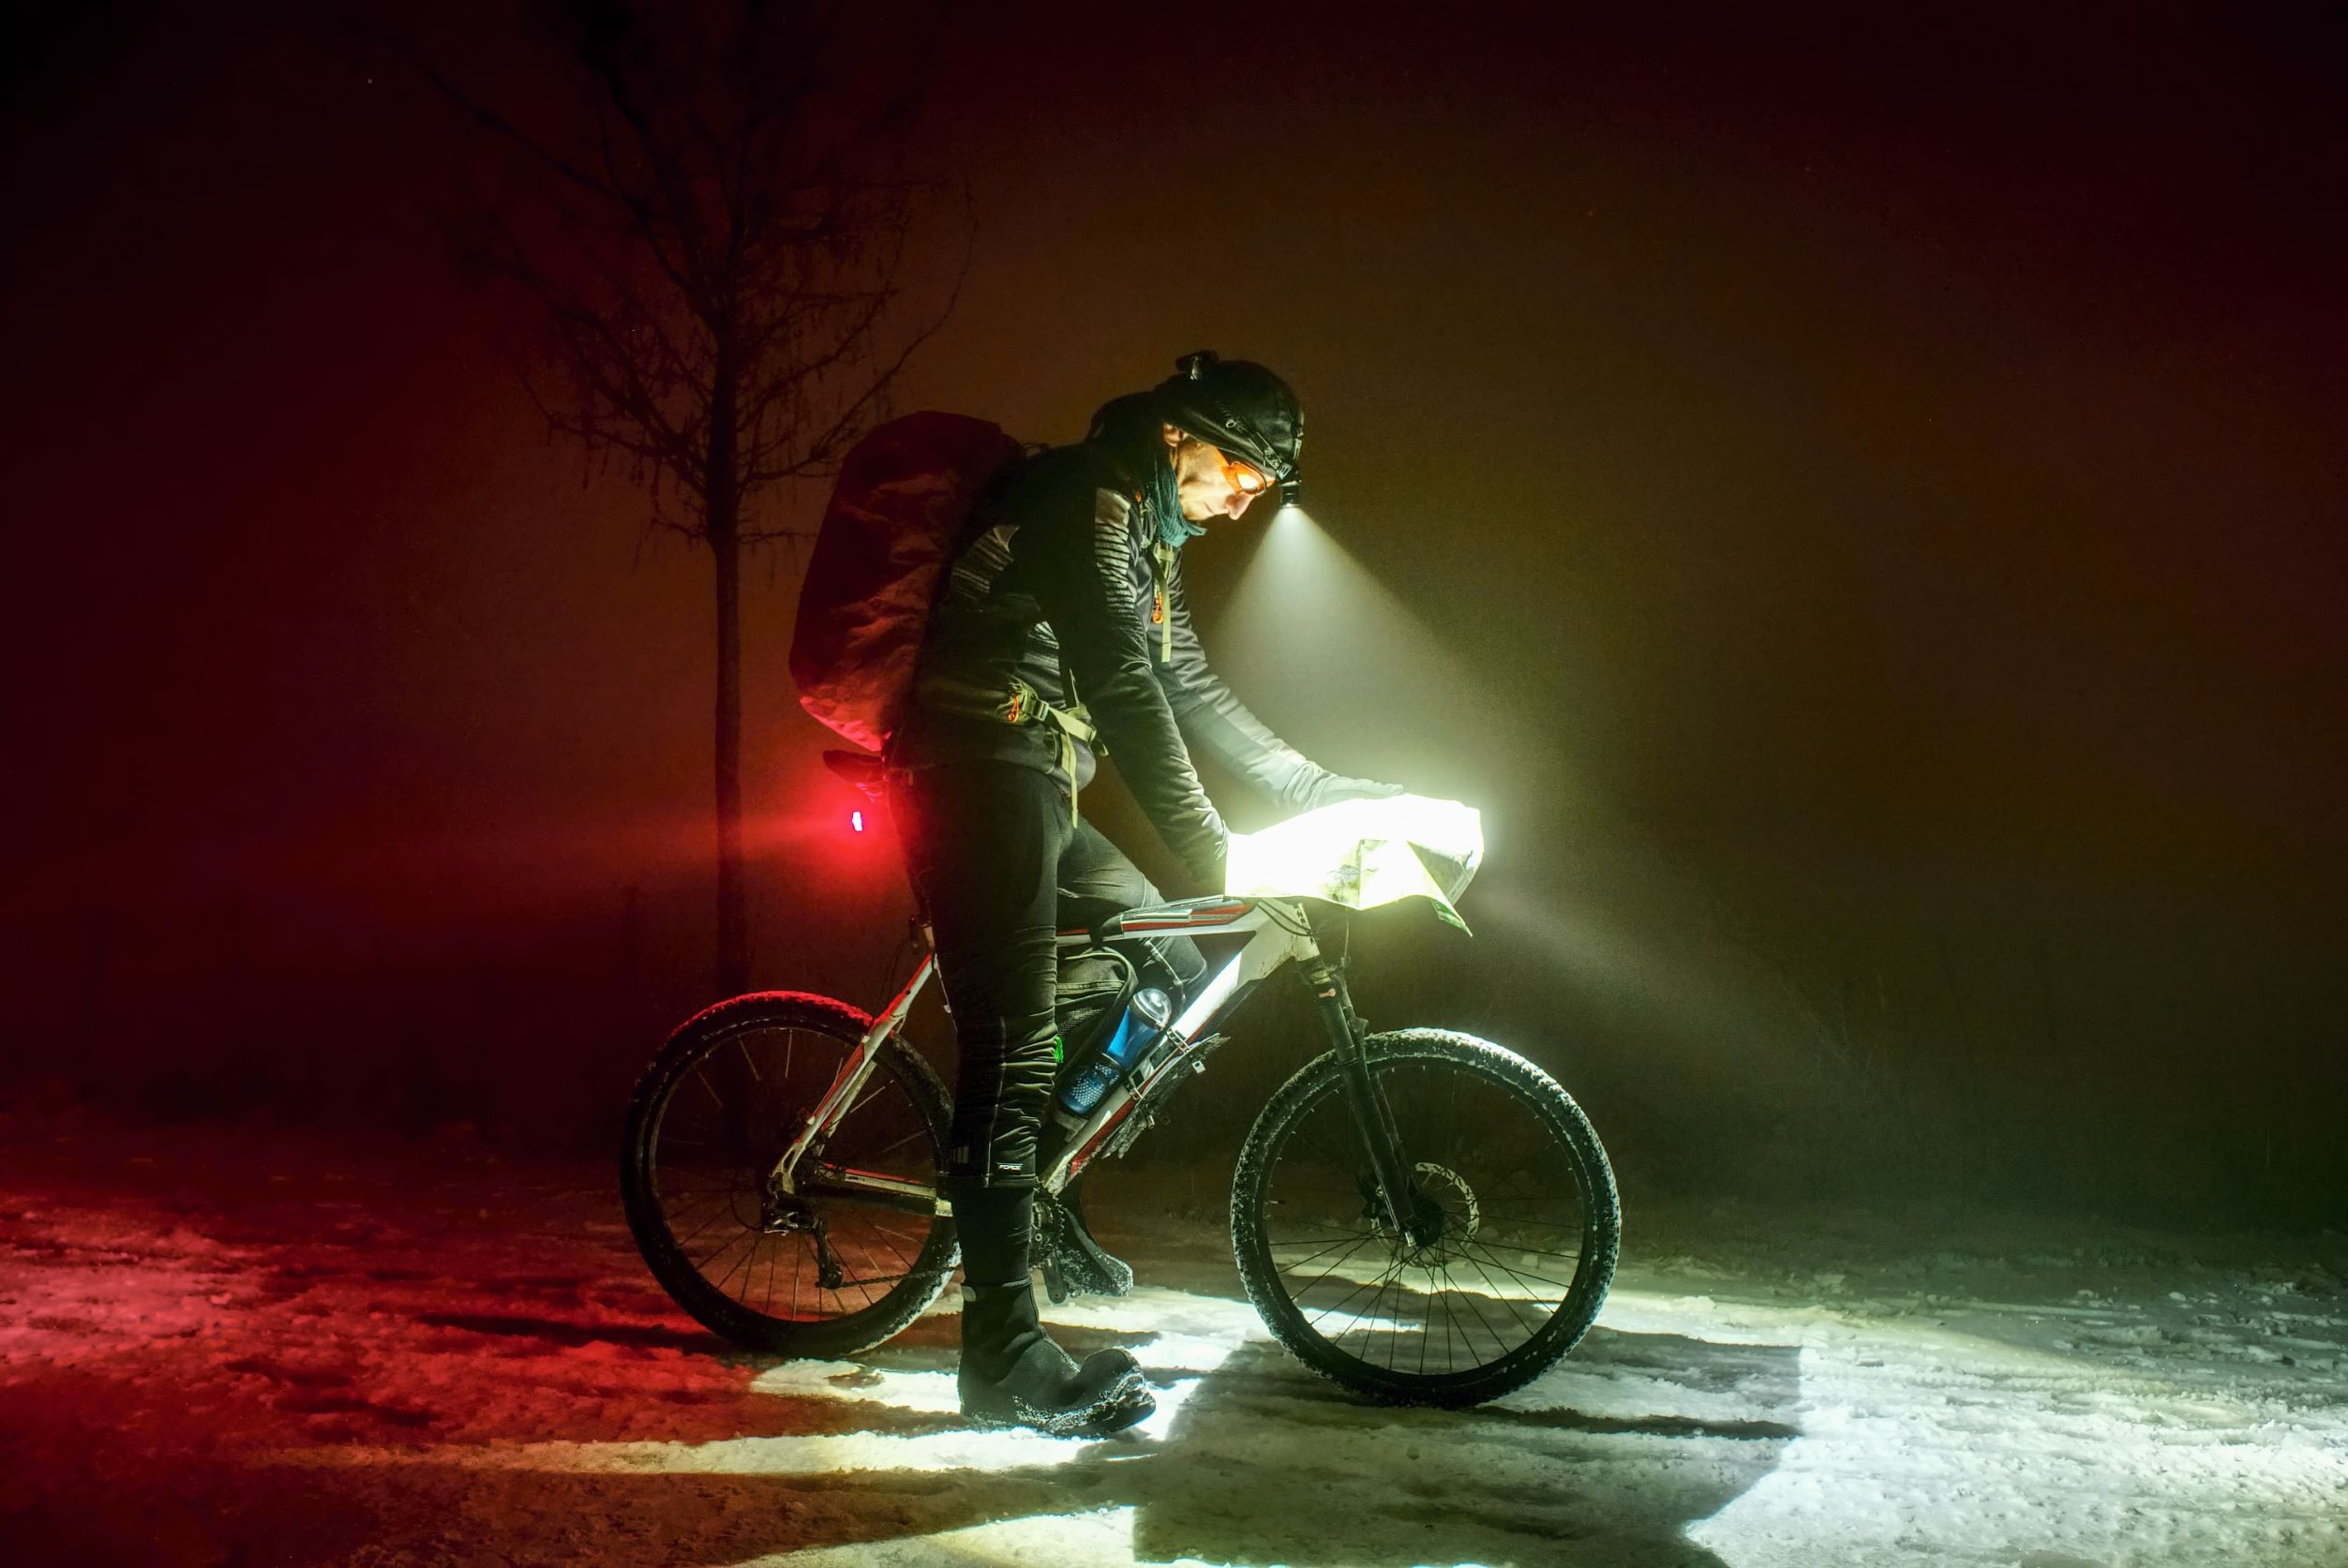 Man on a bike shining a light at night with white a front light, a rear red light and a headlamp.